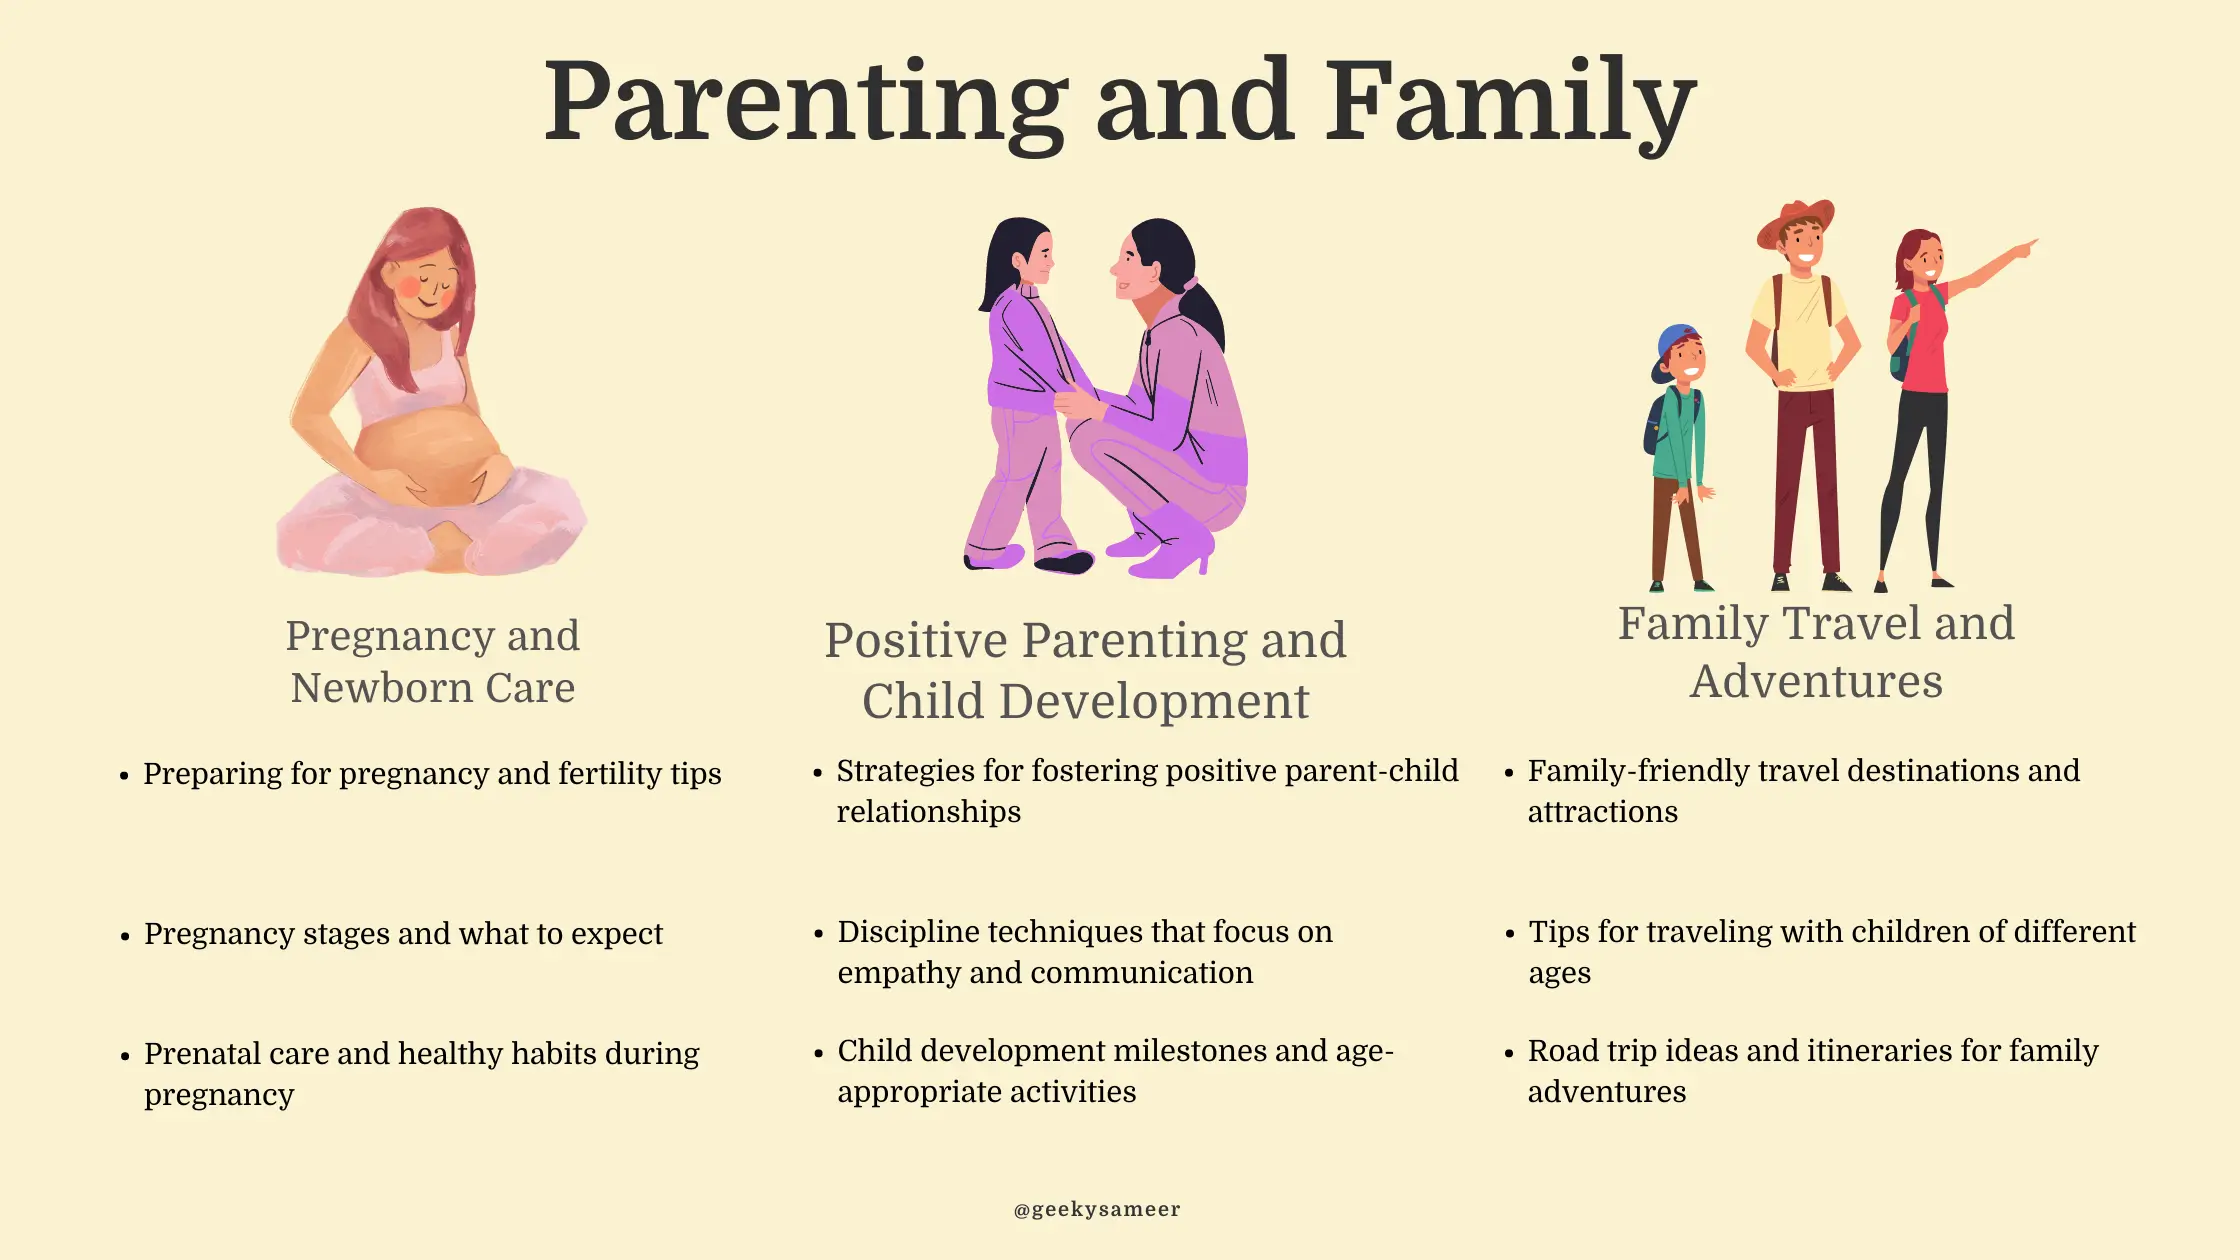 blogging niches for Parenting and Family